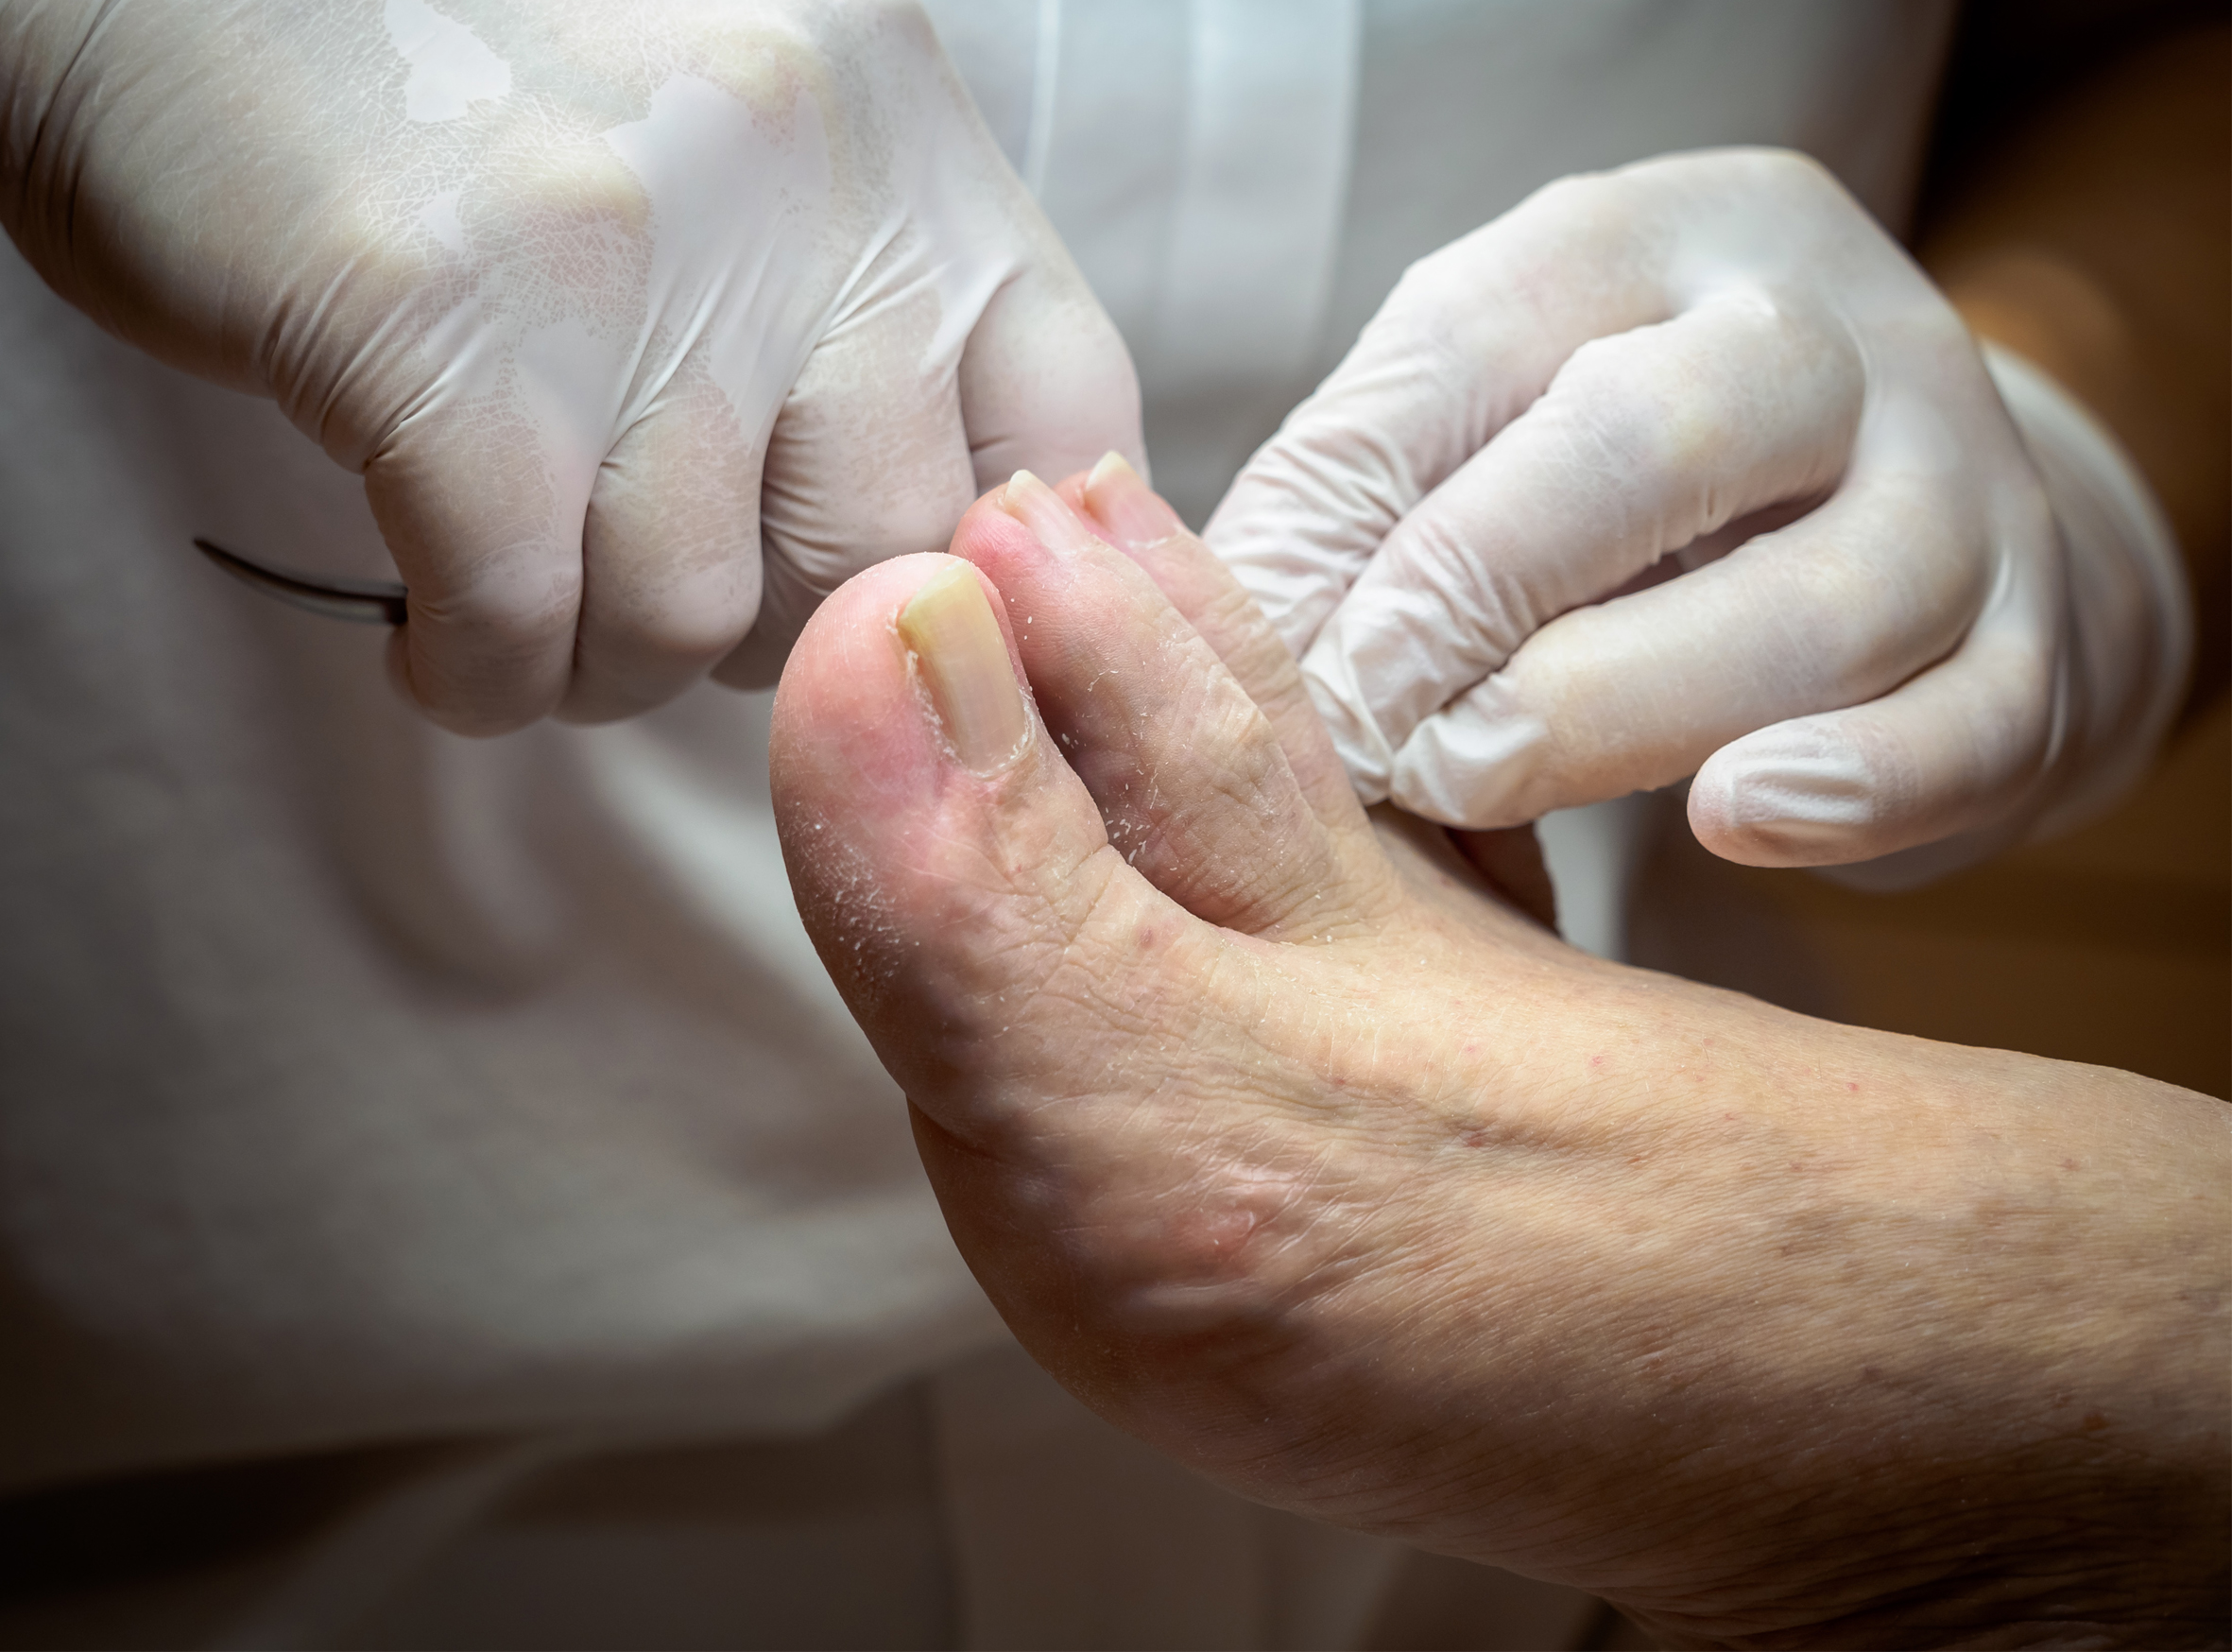 Diabetes foot care and guidelines for healthy feet | Sanders Podiatry